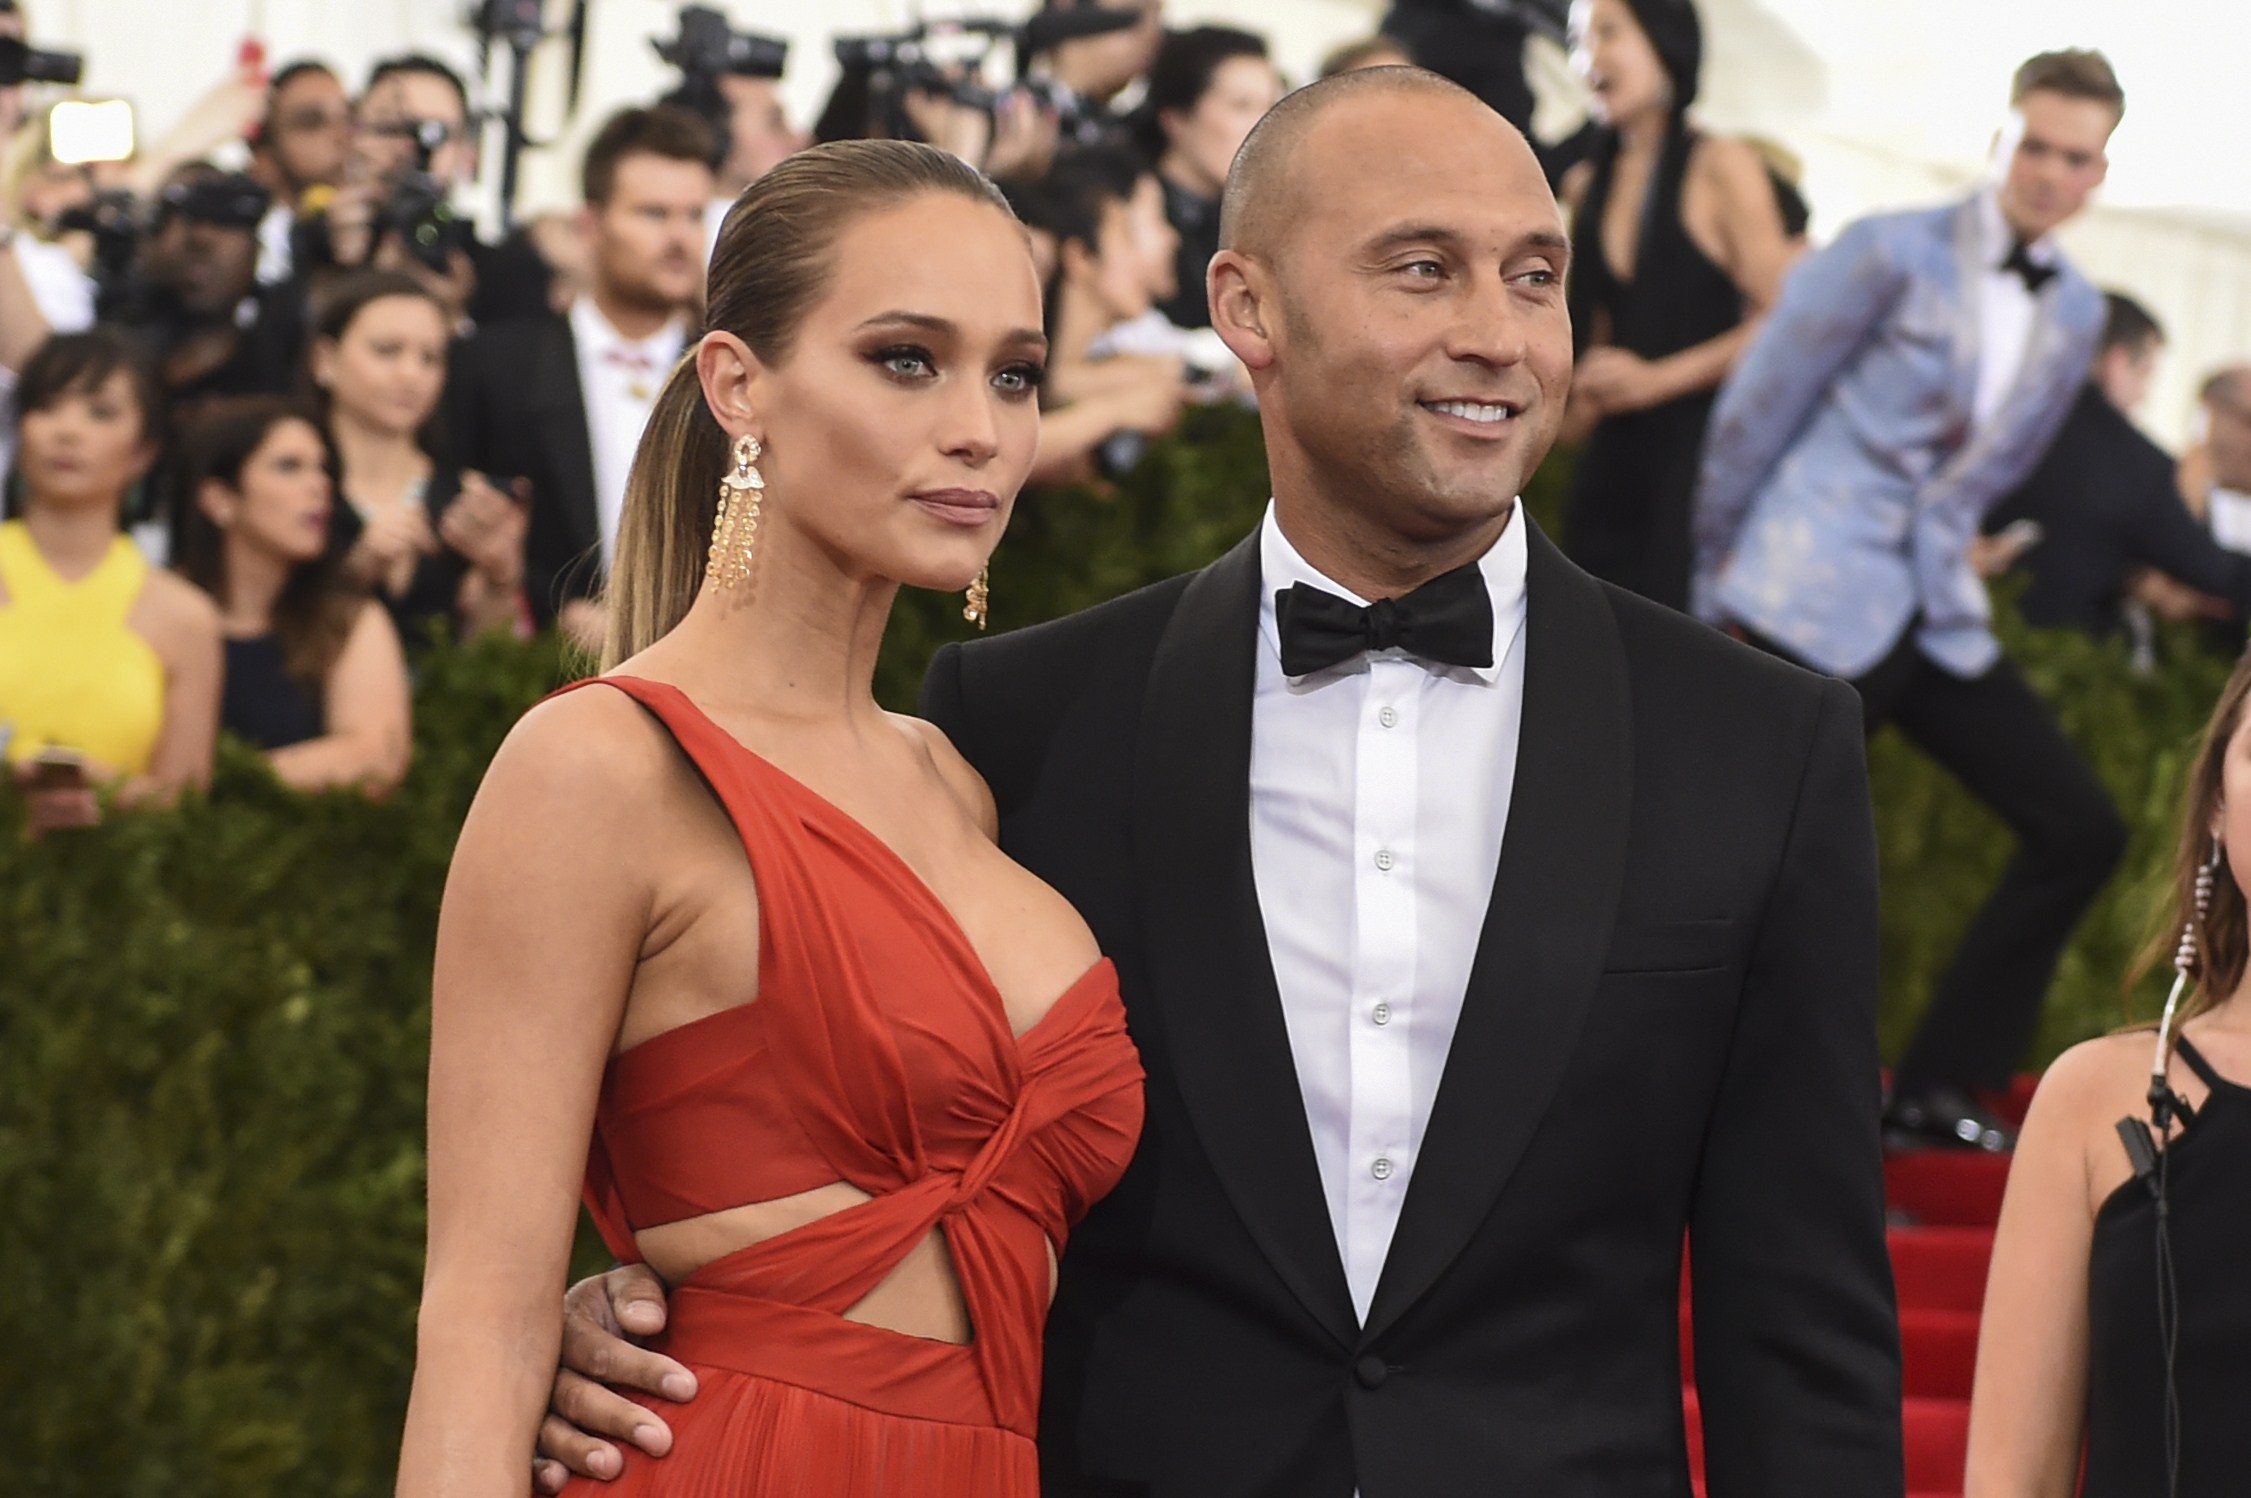 Derek Jeter and Wife Hannah Expecting First Child Together, a Baby Girl!